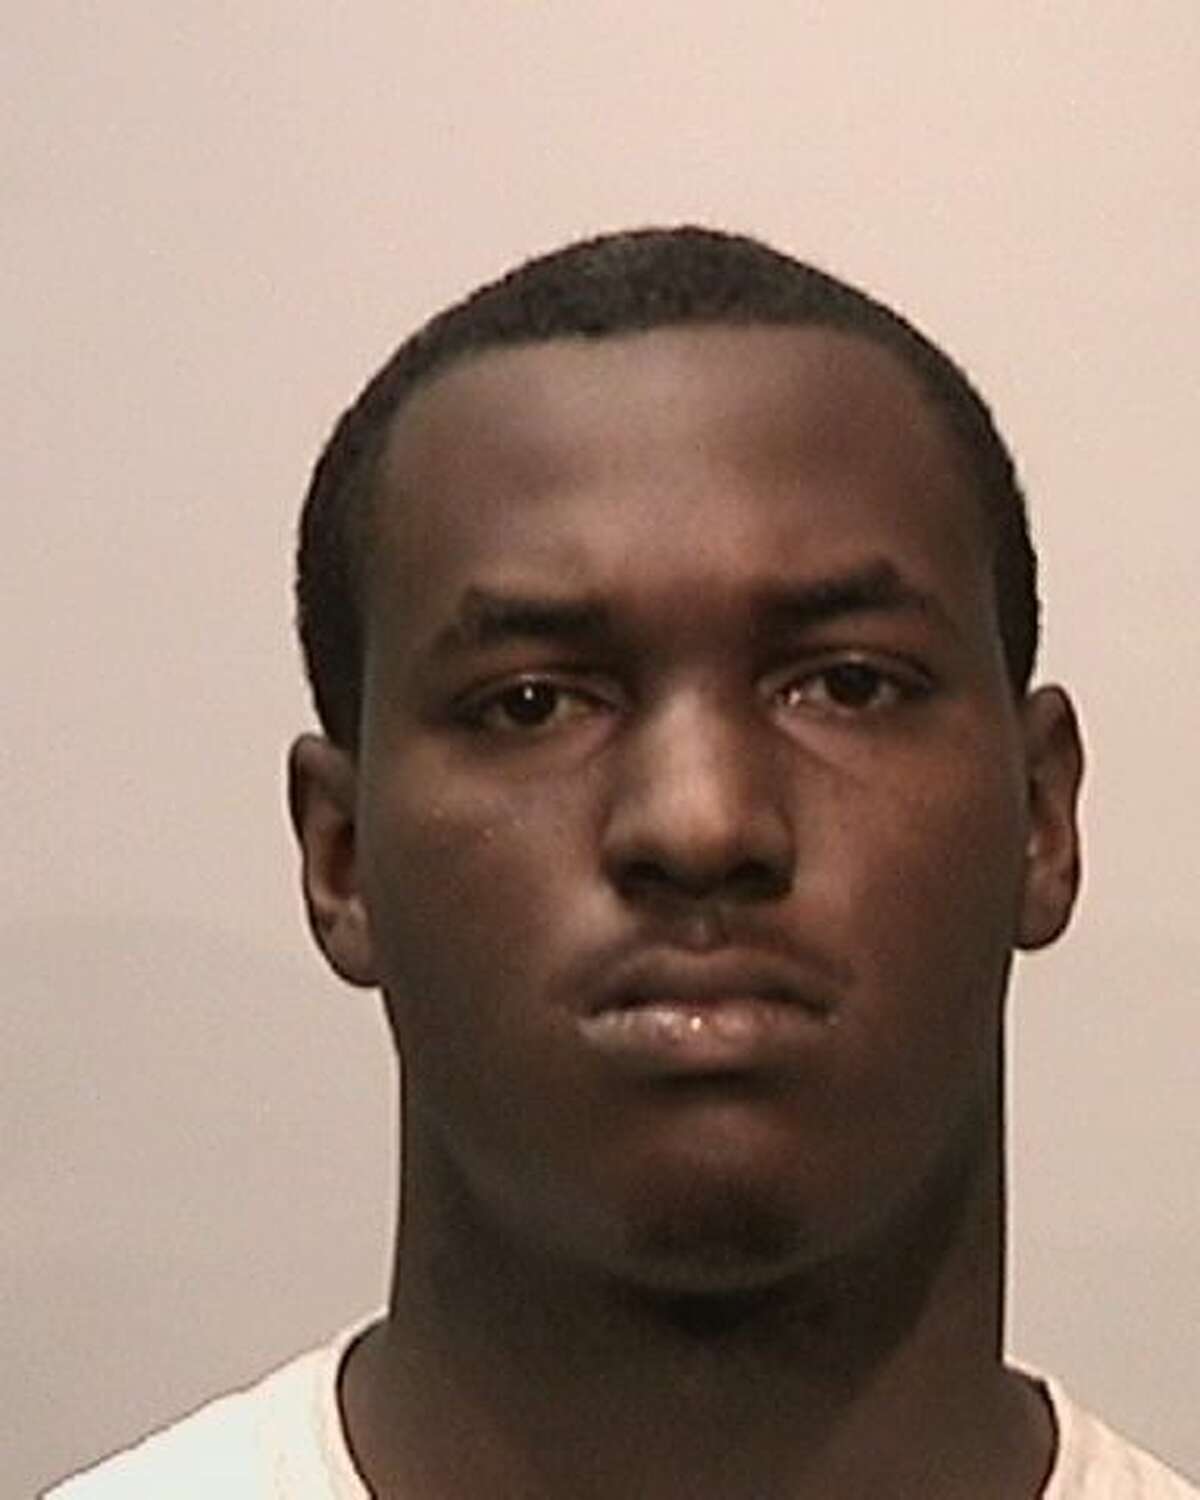 Dashawn Pierson, 19, of Oakland, was arrested on Oct. 22 in connection with a July strong-arm robbery in San Francisco, authorities said.